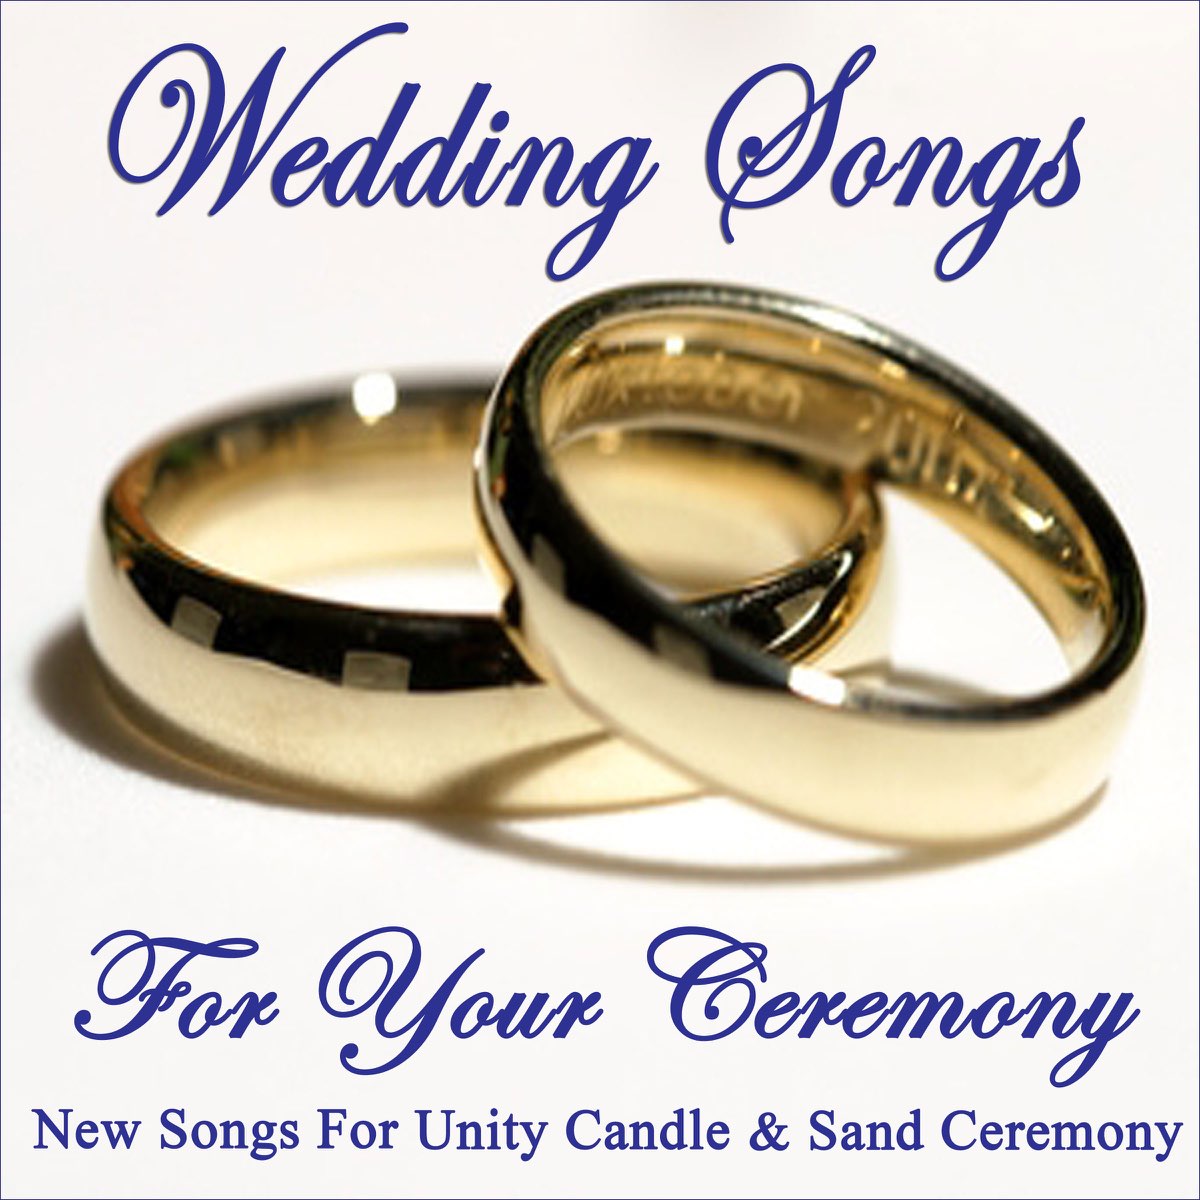 ‎Wedding Songs for Your Ceremony New Songs for Unity Candle & Sand